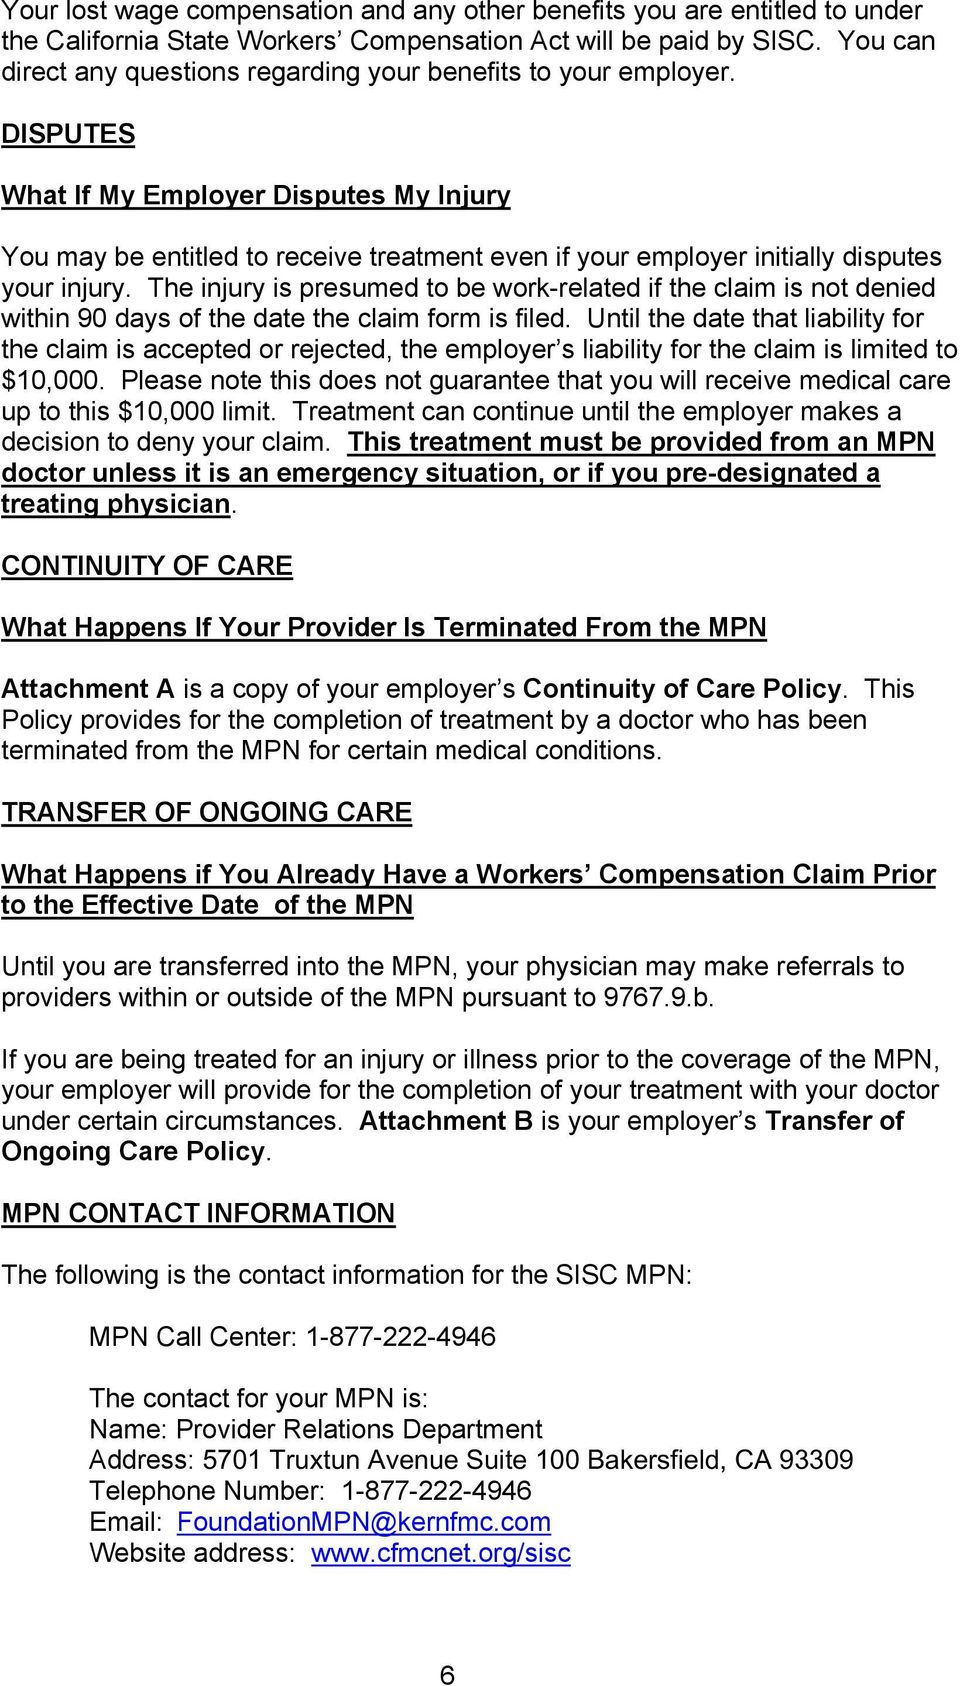 DISPUTES What If My Employer Disputes My Injury You may be entitled to receive treatment even if your employer initially disputes your injury.